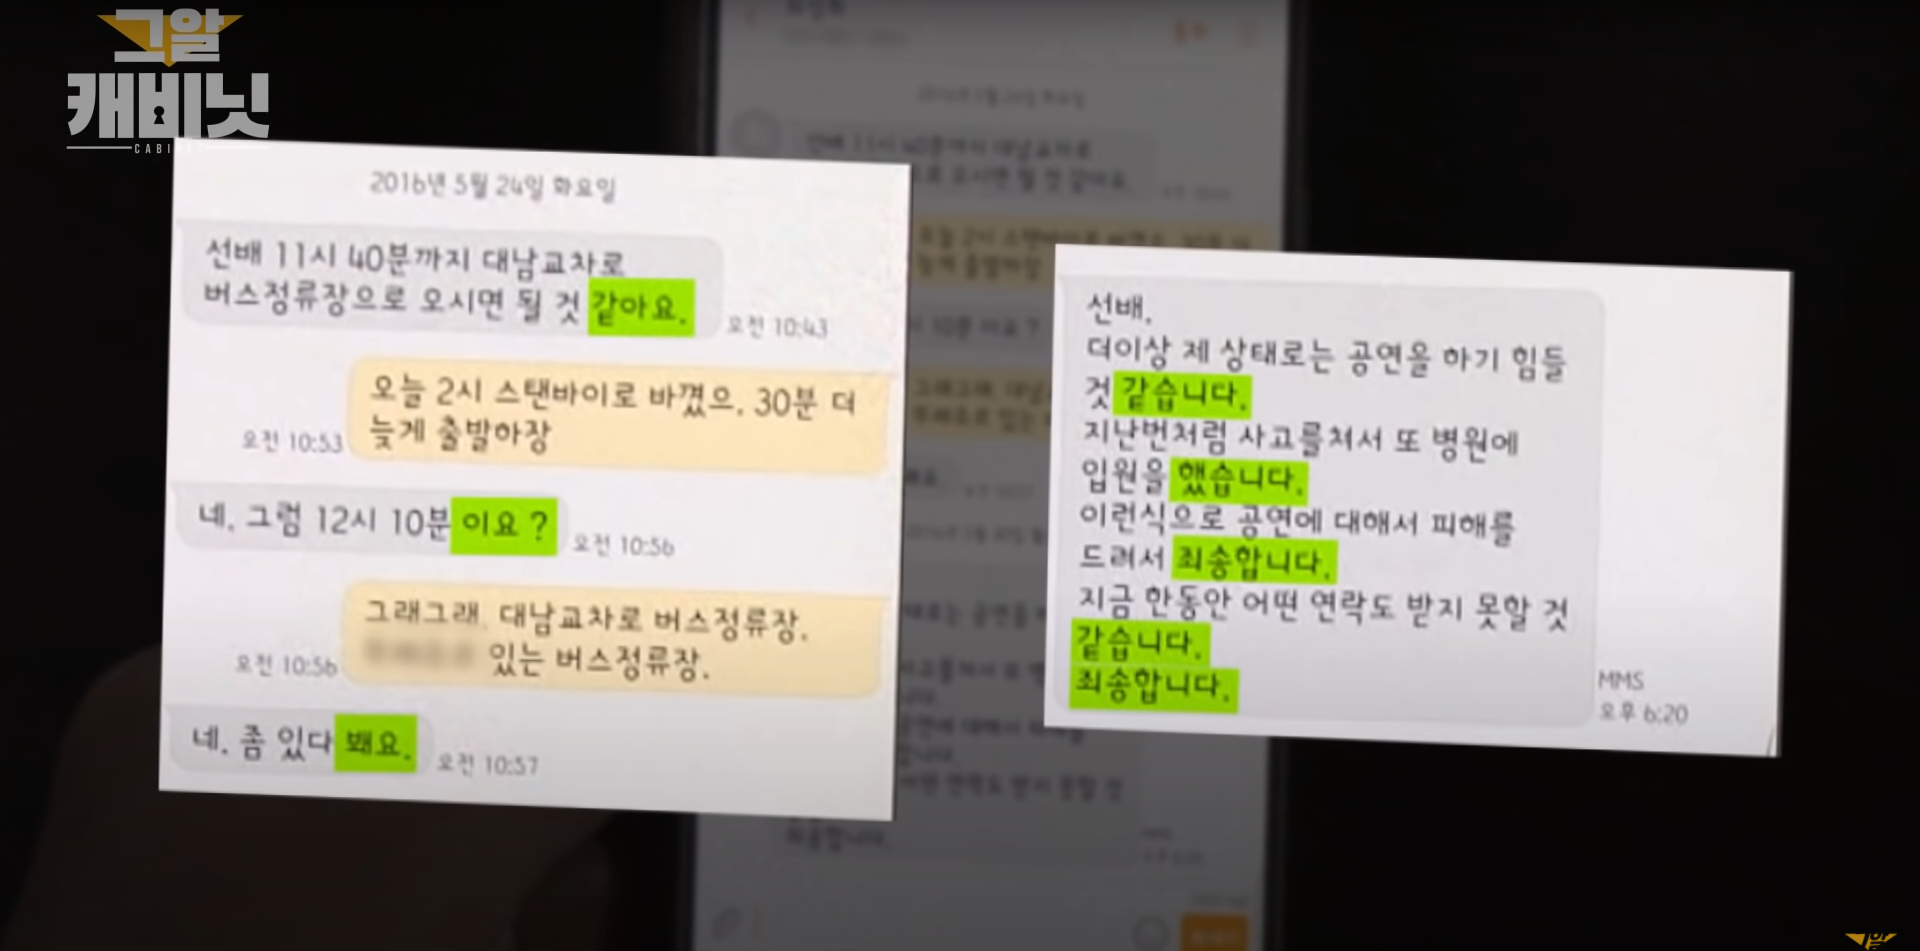 unsolved crimes in korea - seong-hee's texts